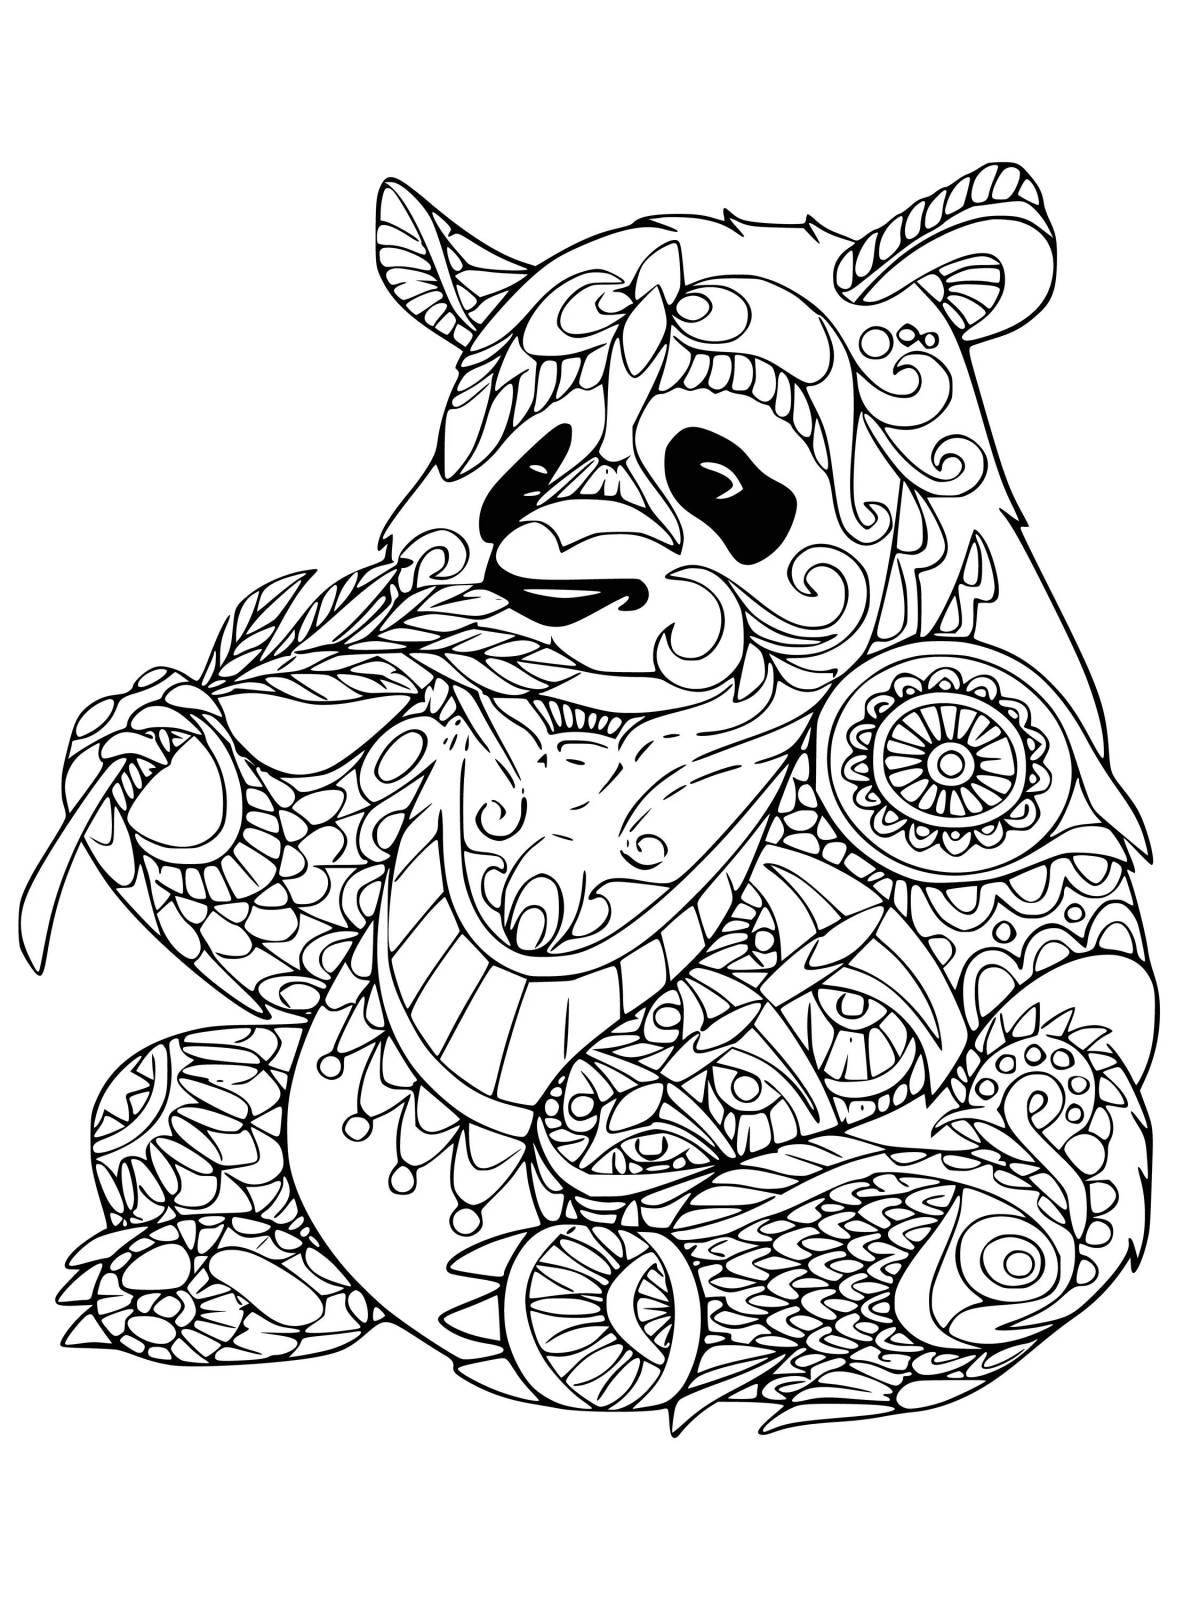 Colorful animal coloring pages for adults